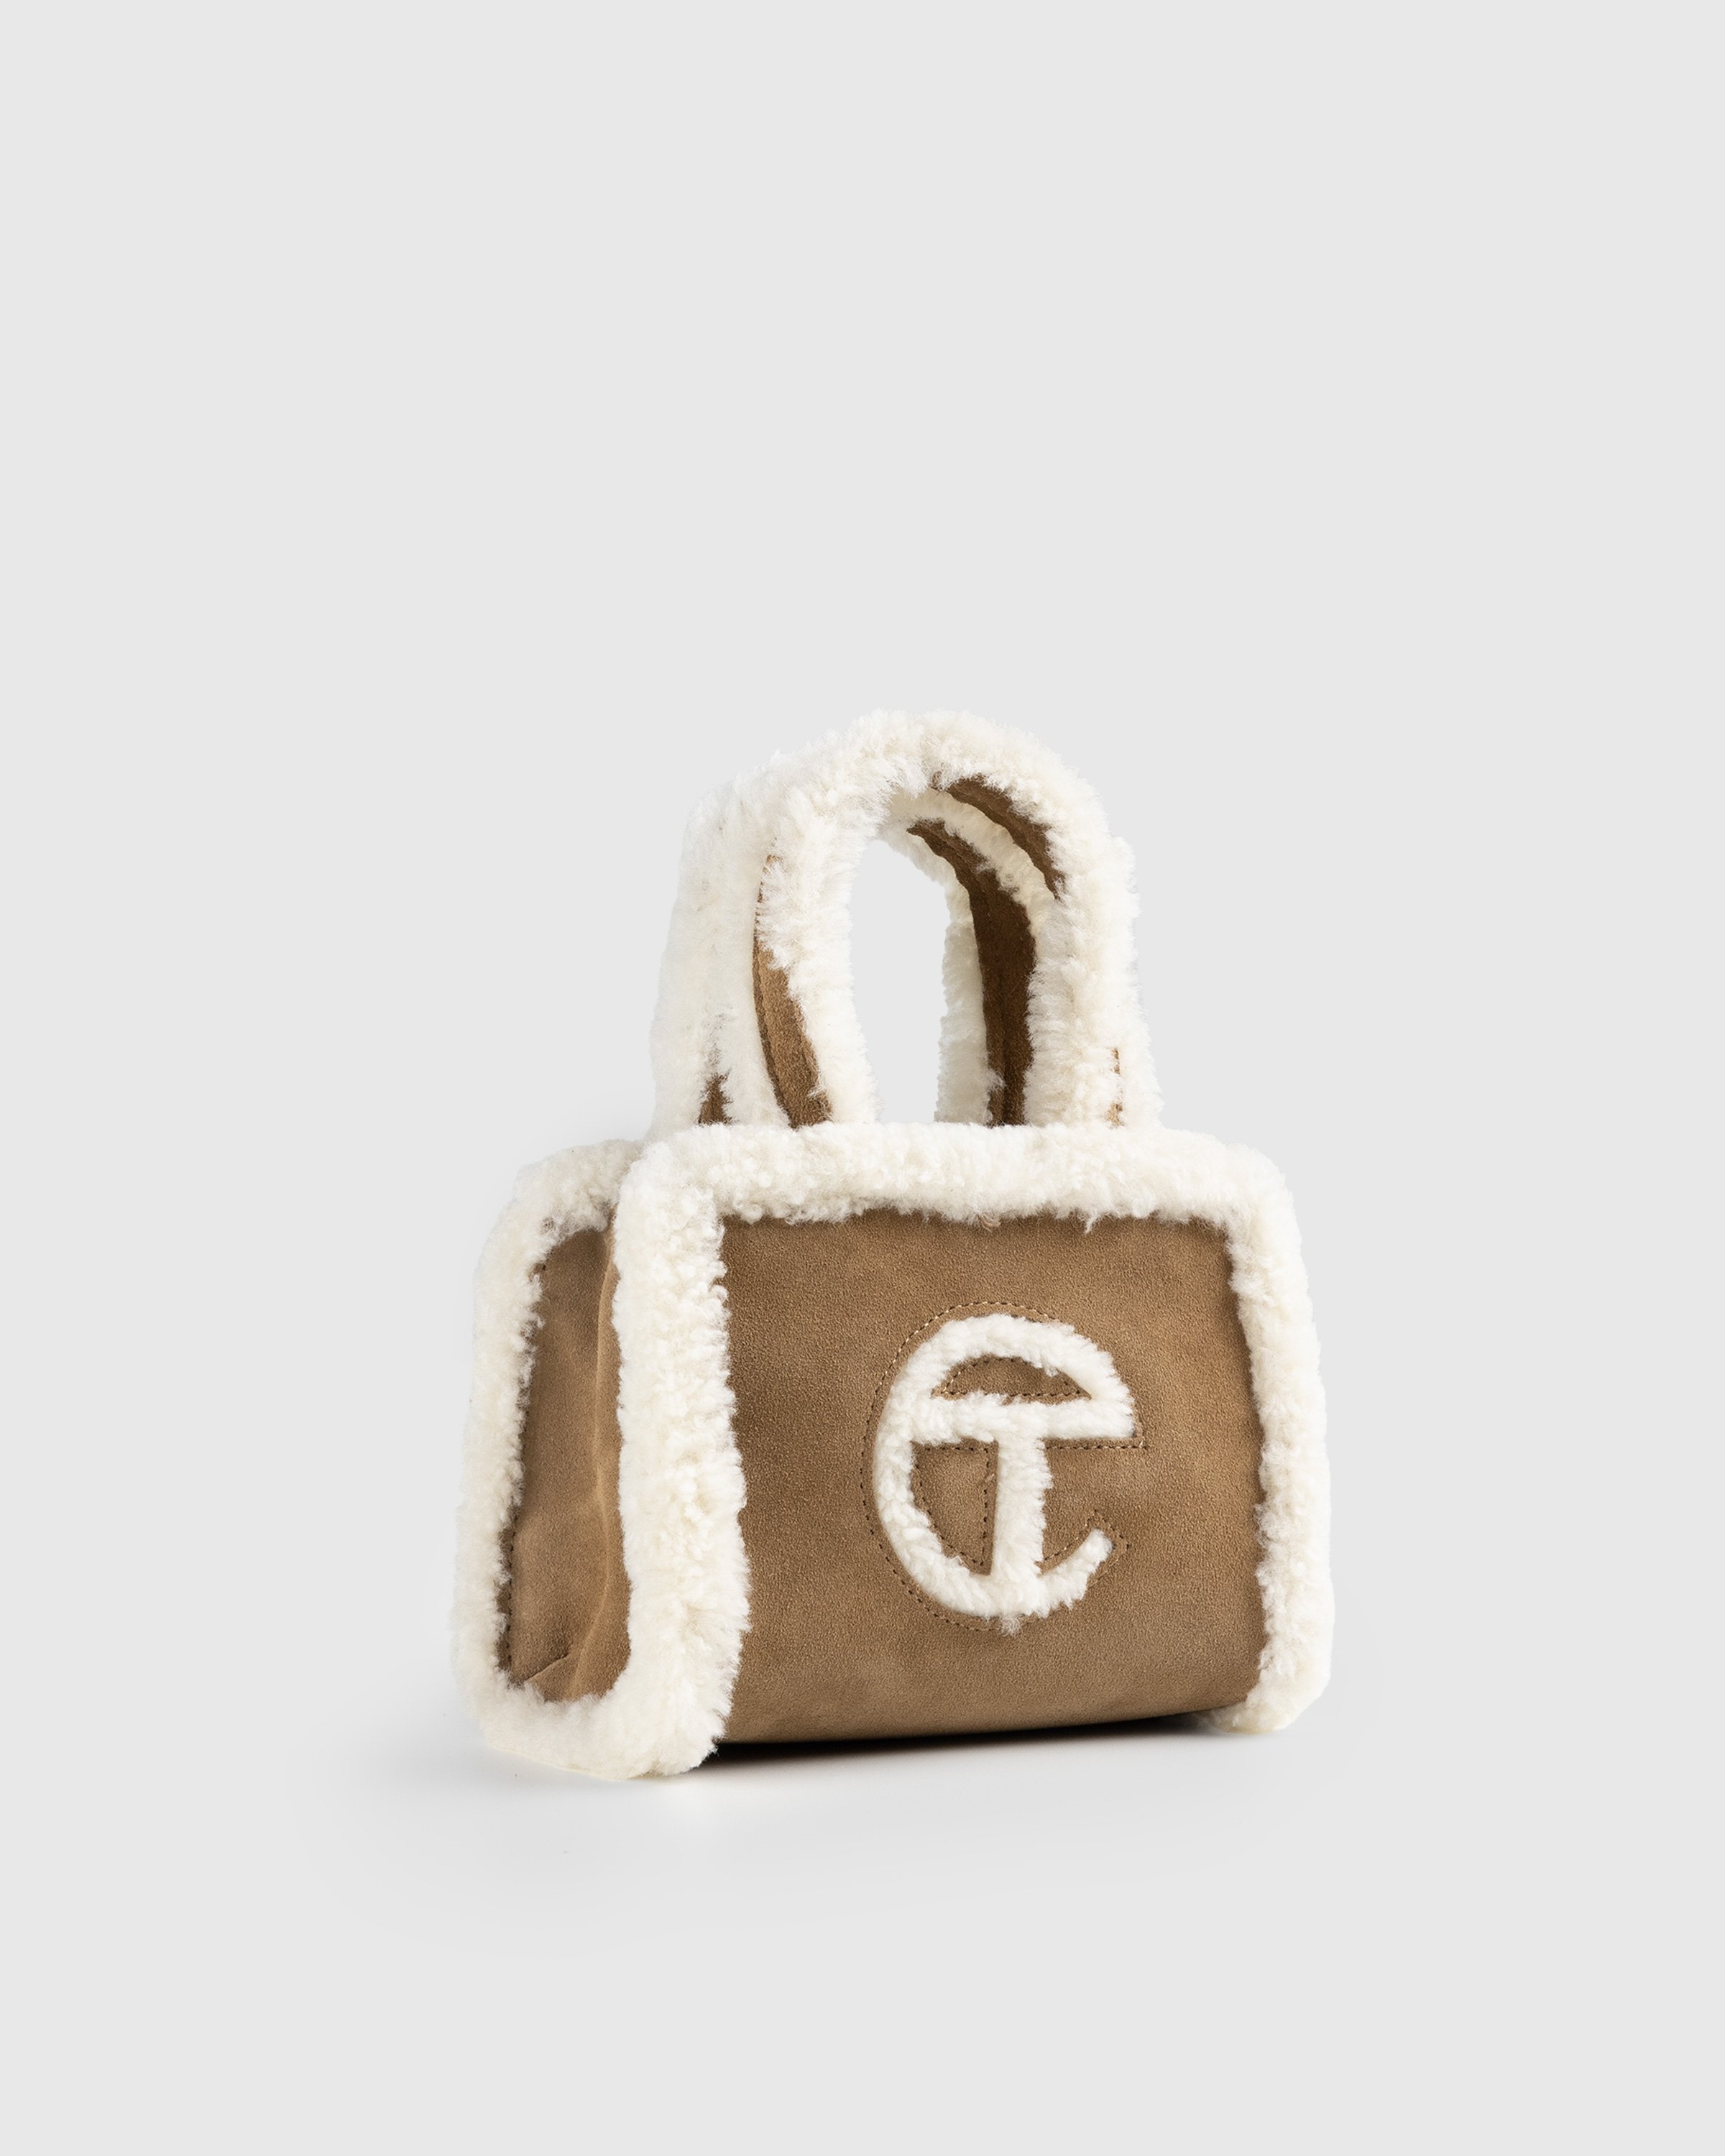 UGG - UGG X TELFAR SMALL SHOPPER  HBX - Globally Curated Fashion and  Lifestyle by Hypebeast